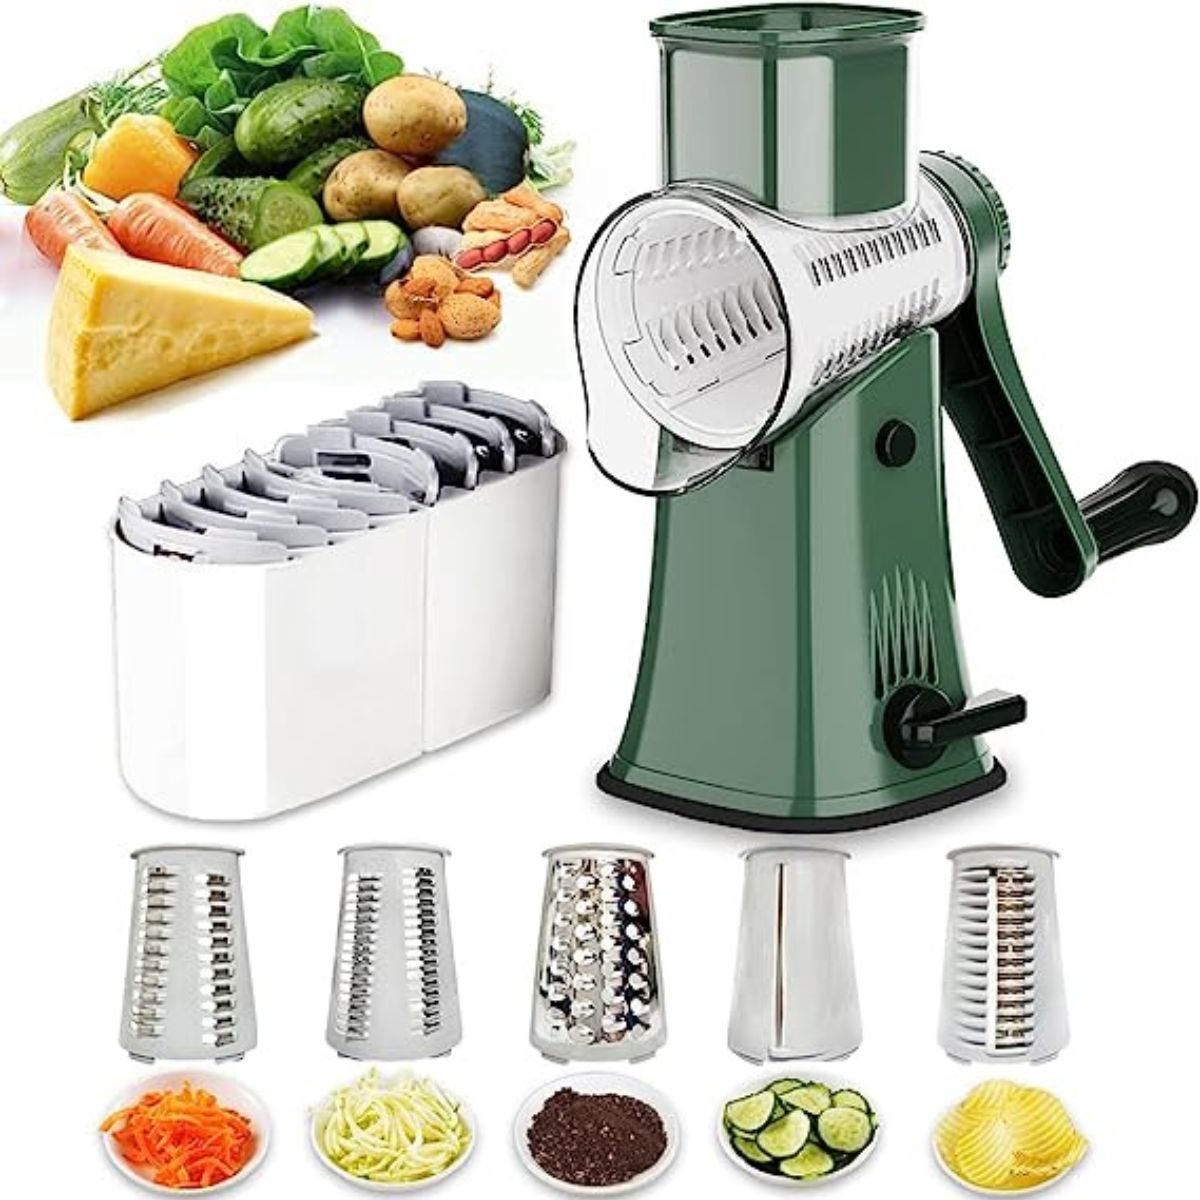 Rotary Cheese Grater Shredder - The Buy Guide